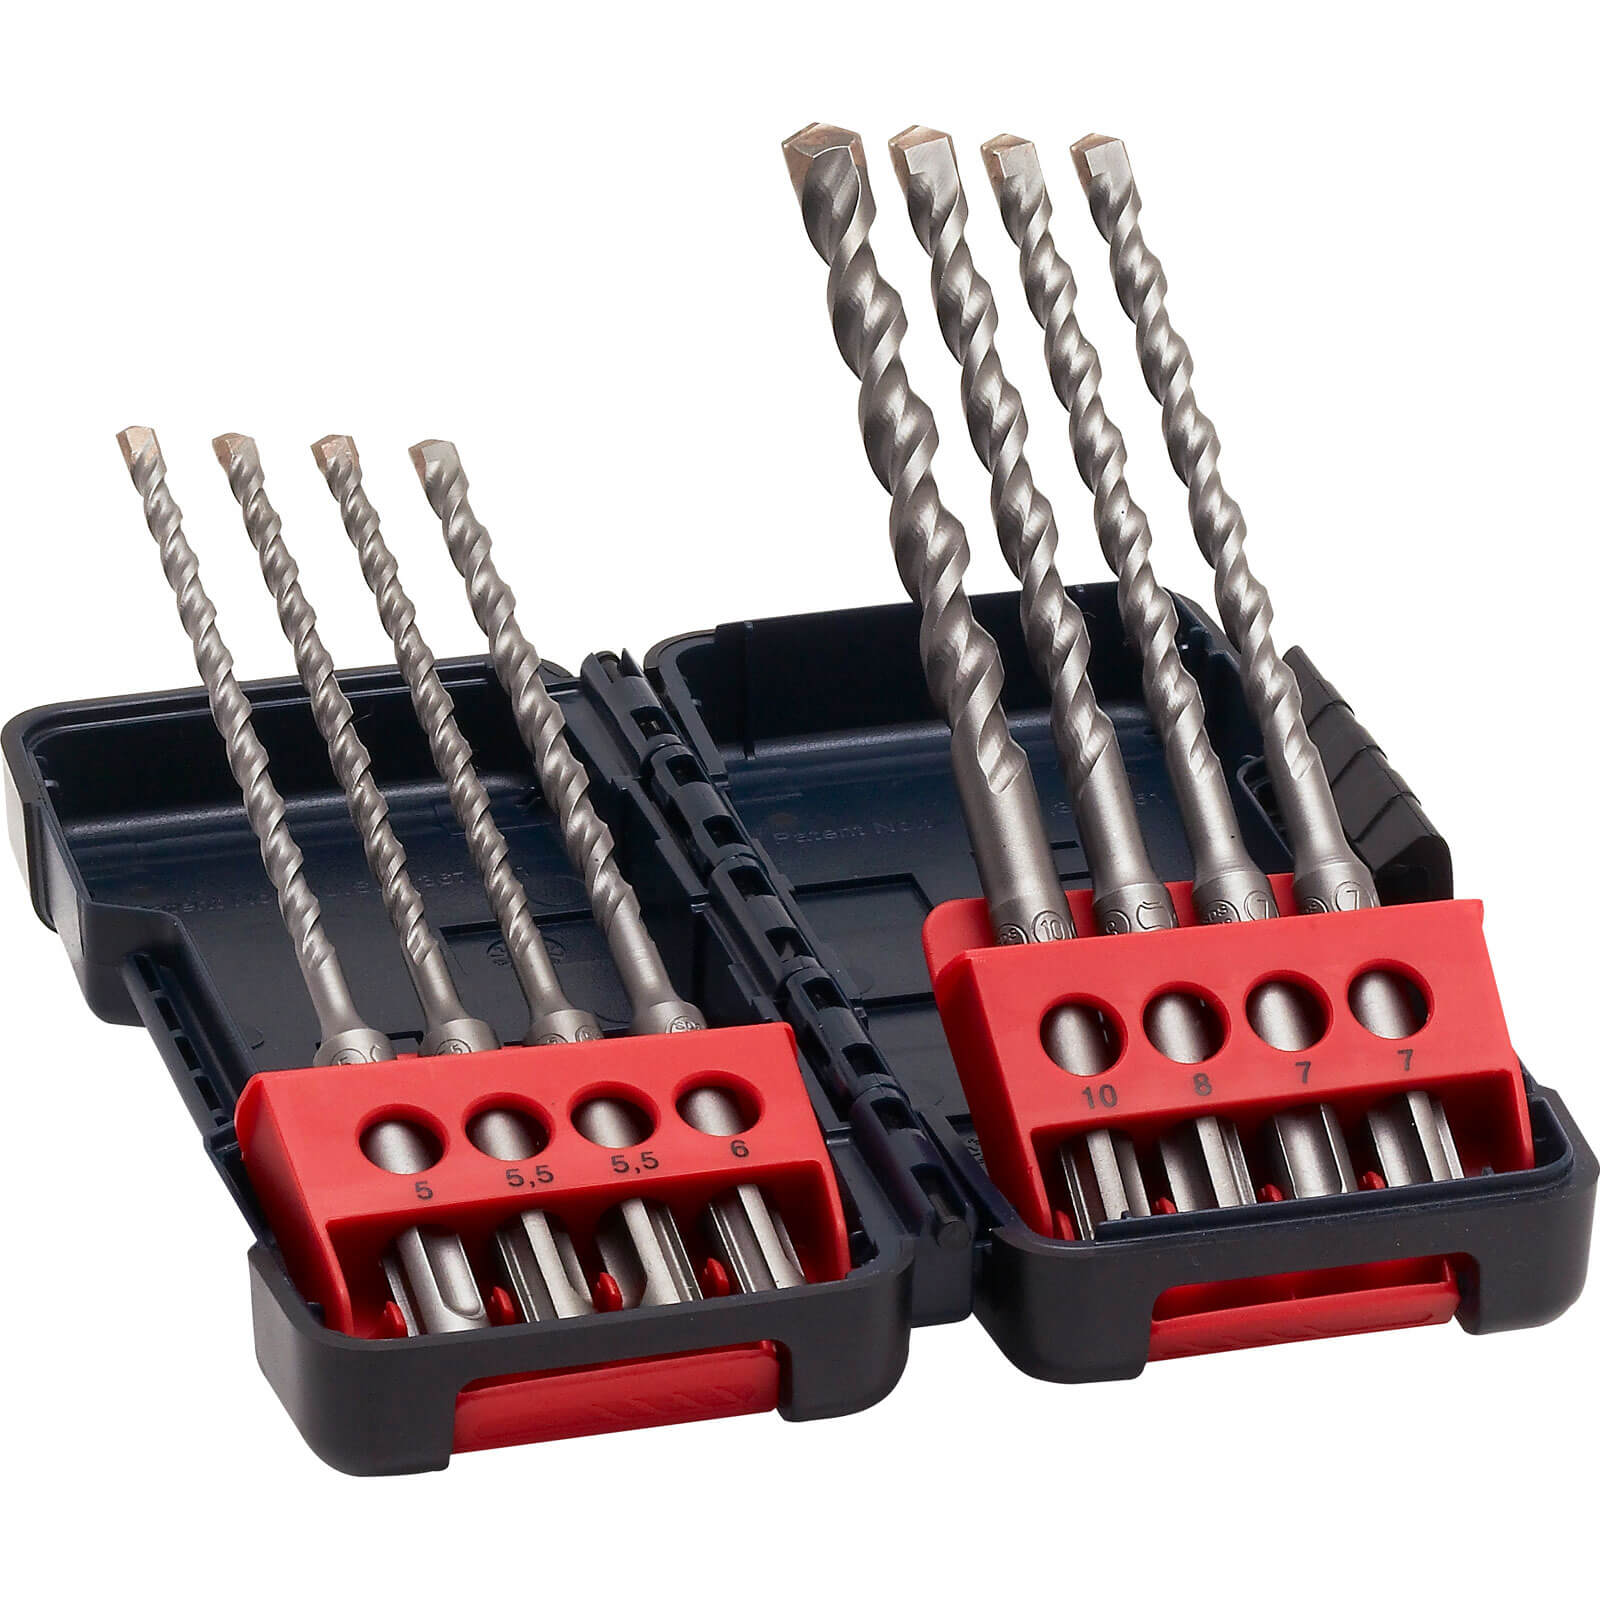 Image of Bosch 8 Piece SDS Drill Bit Set In Tough Case